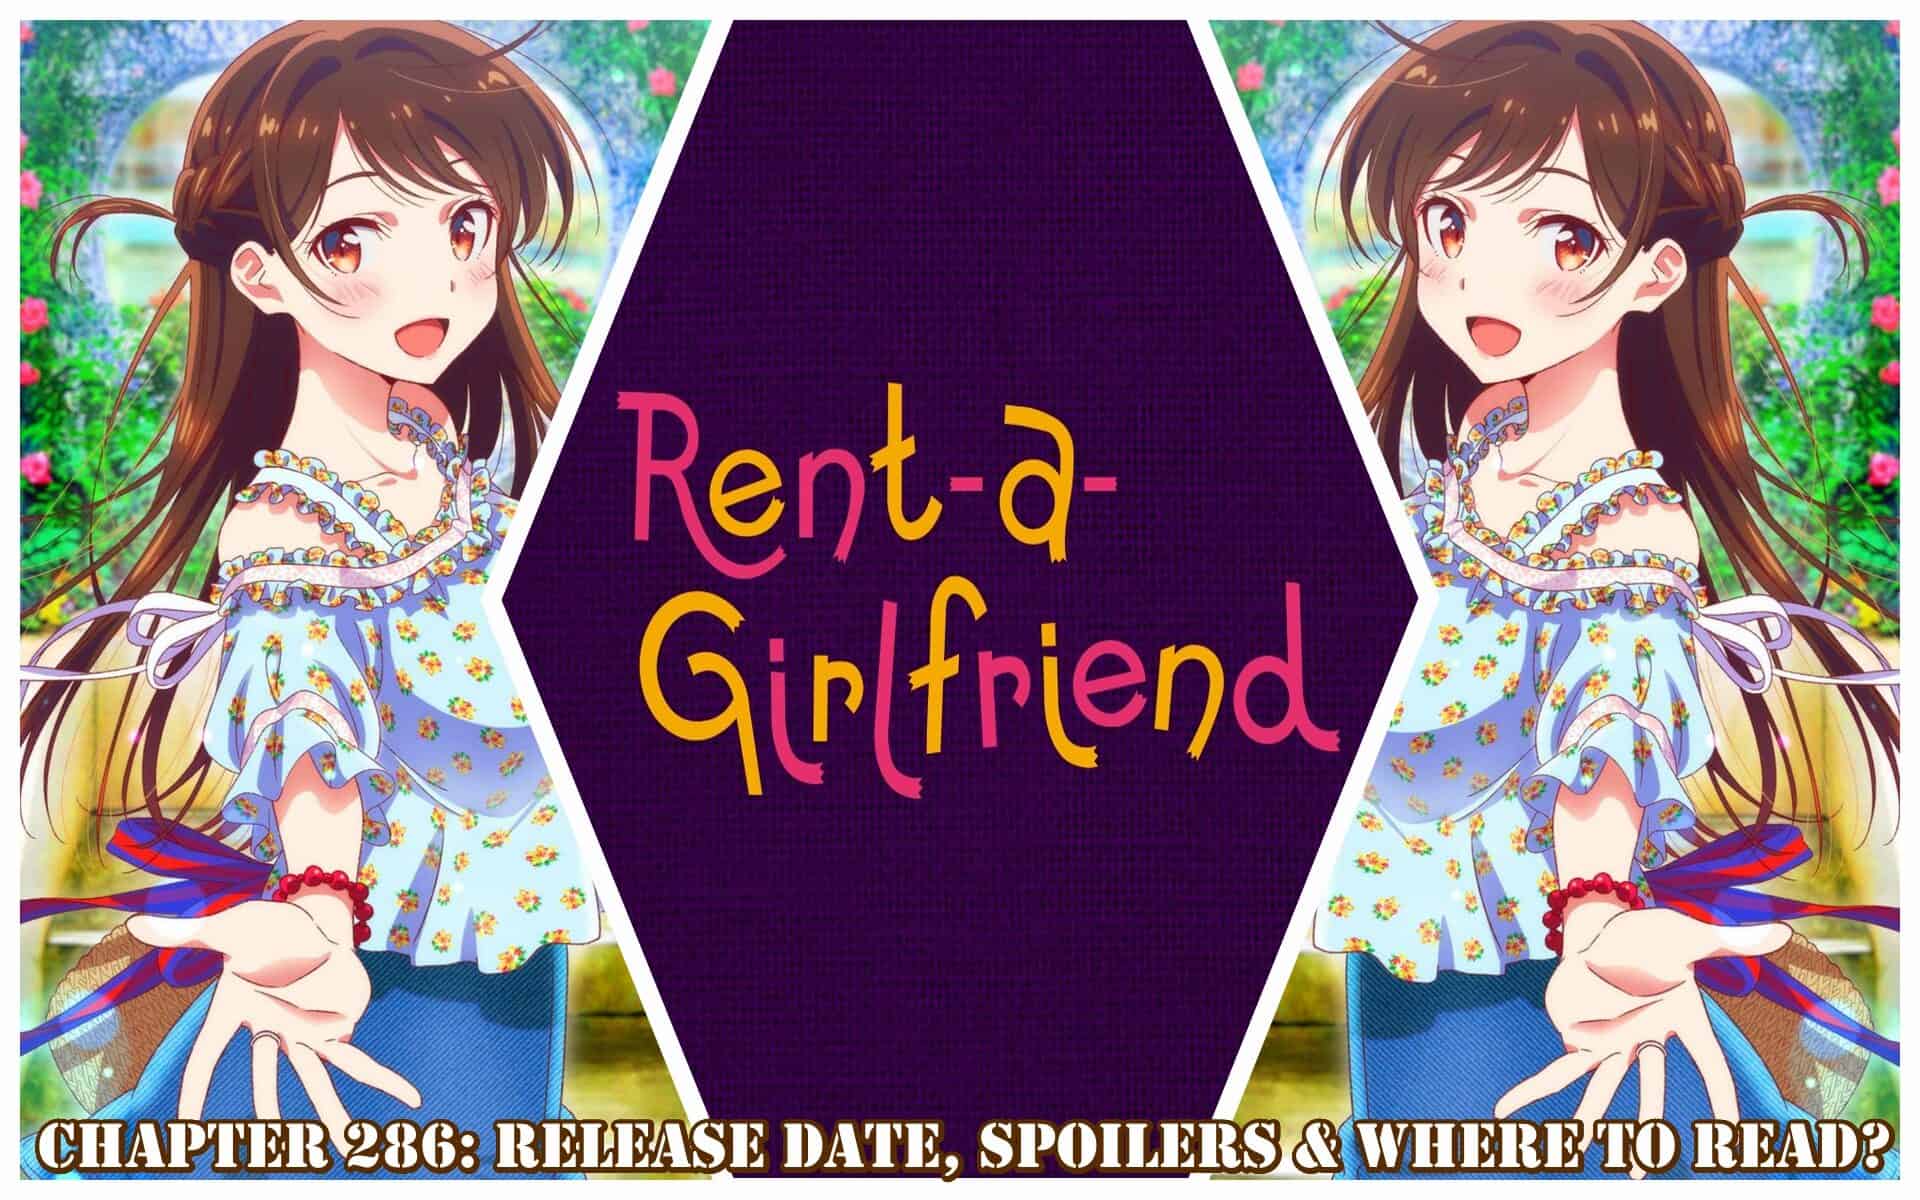 Rent A Girlfriend Chapter 286: Release Date, Spoilers & Where to Read?